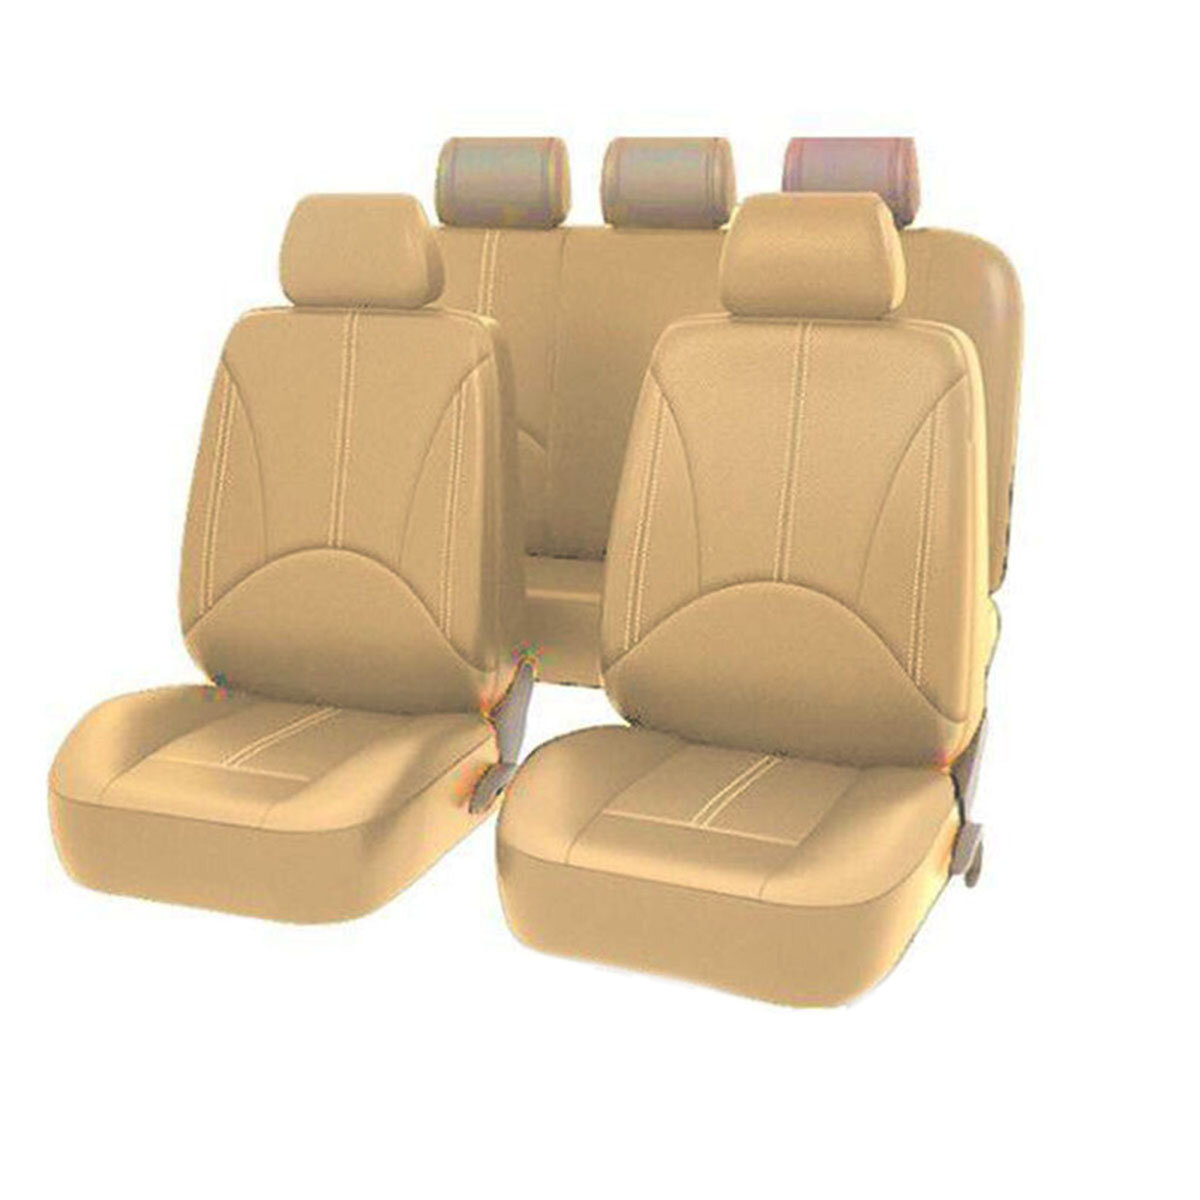 9pcs Front Row Full Set Seat Cover Car Accessories Universal Interior Cushion